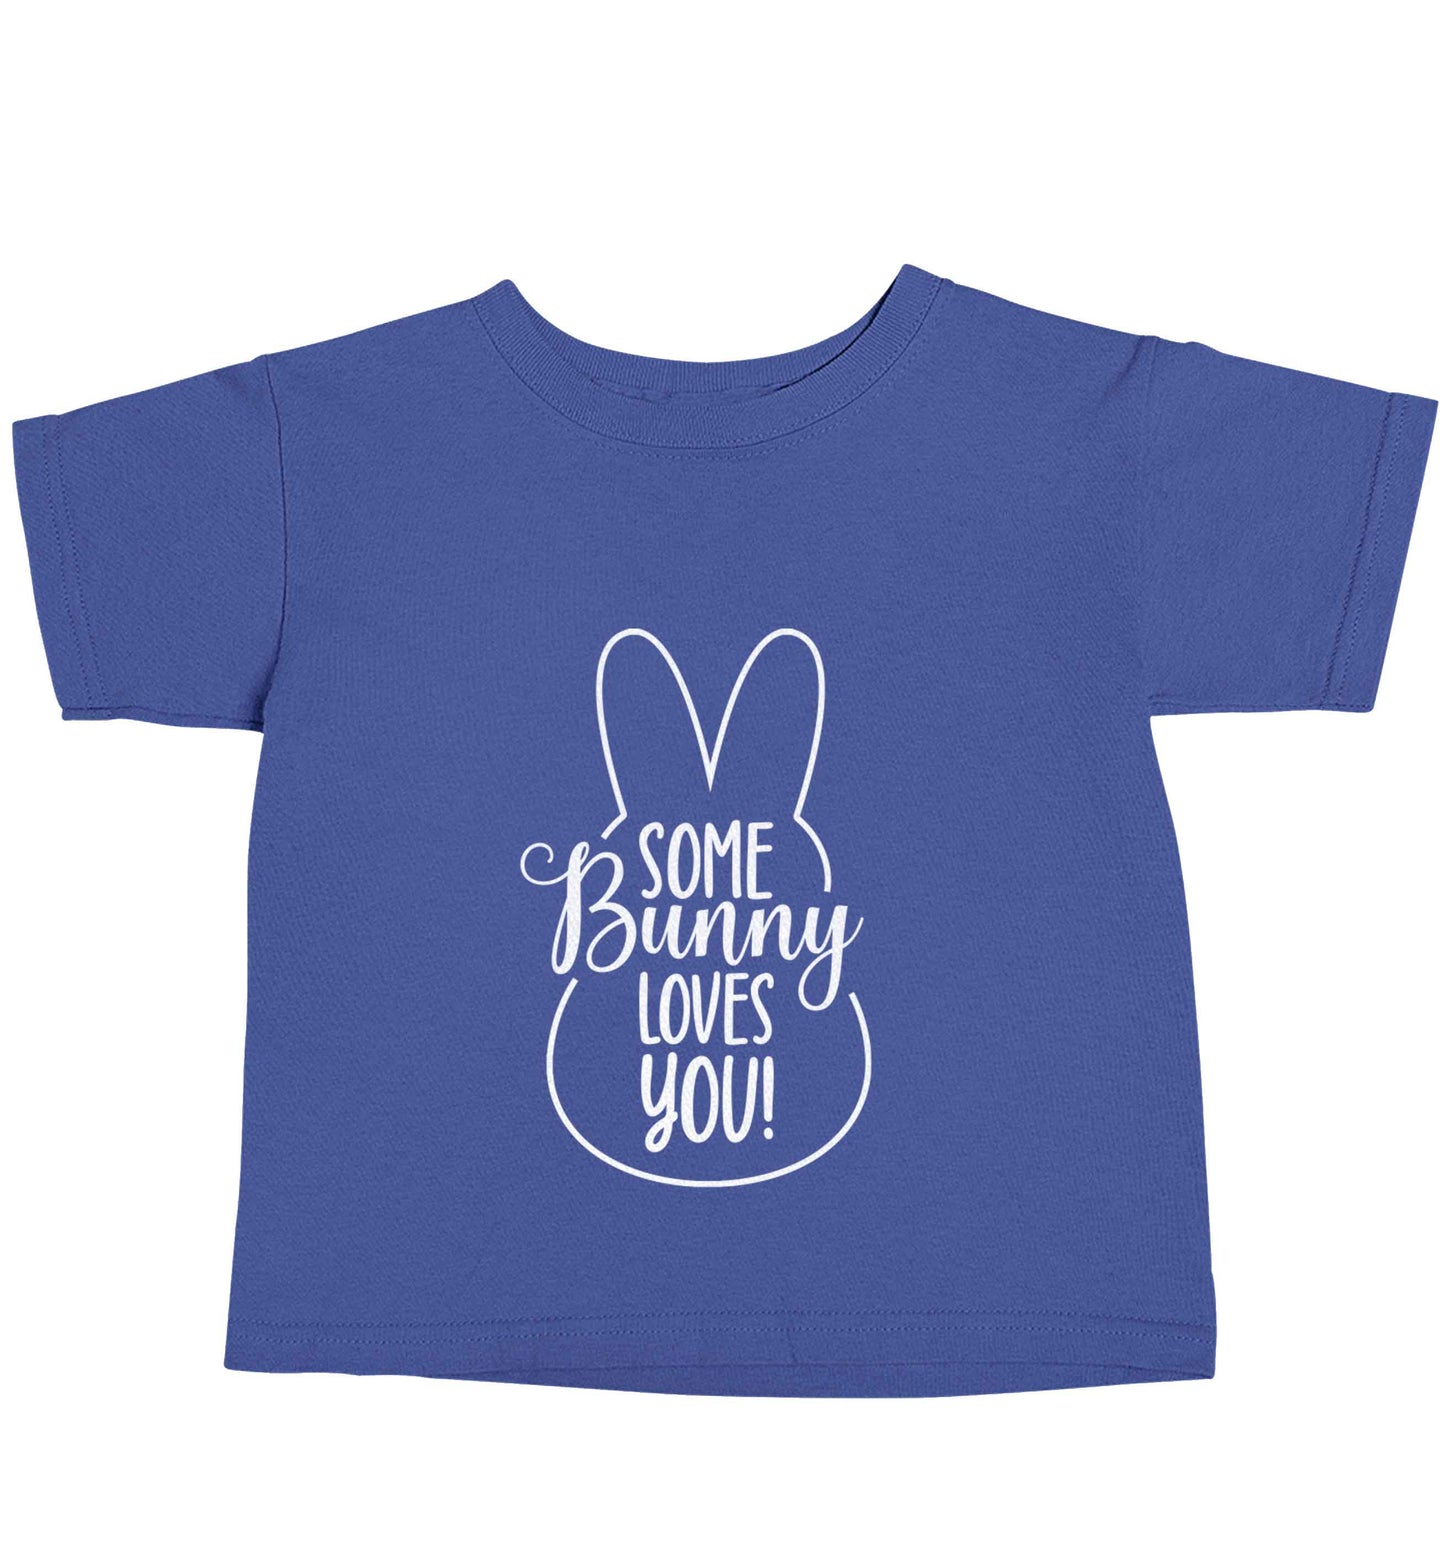 Some bunny loves you blue baby toddler Tshirt 2 Years